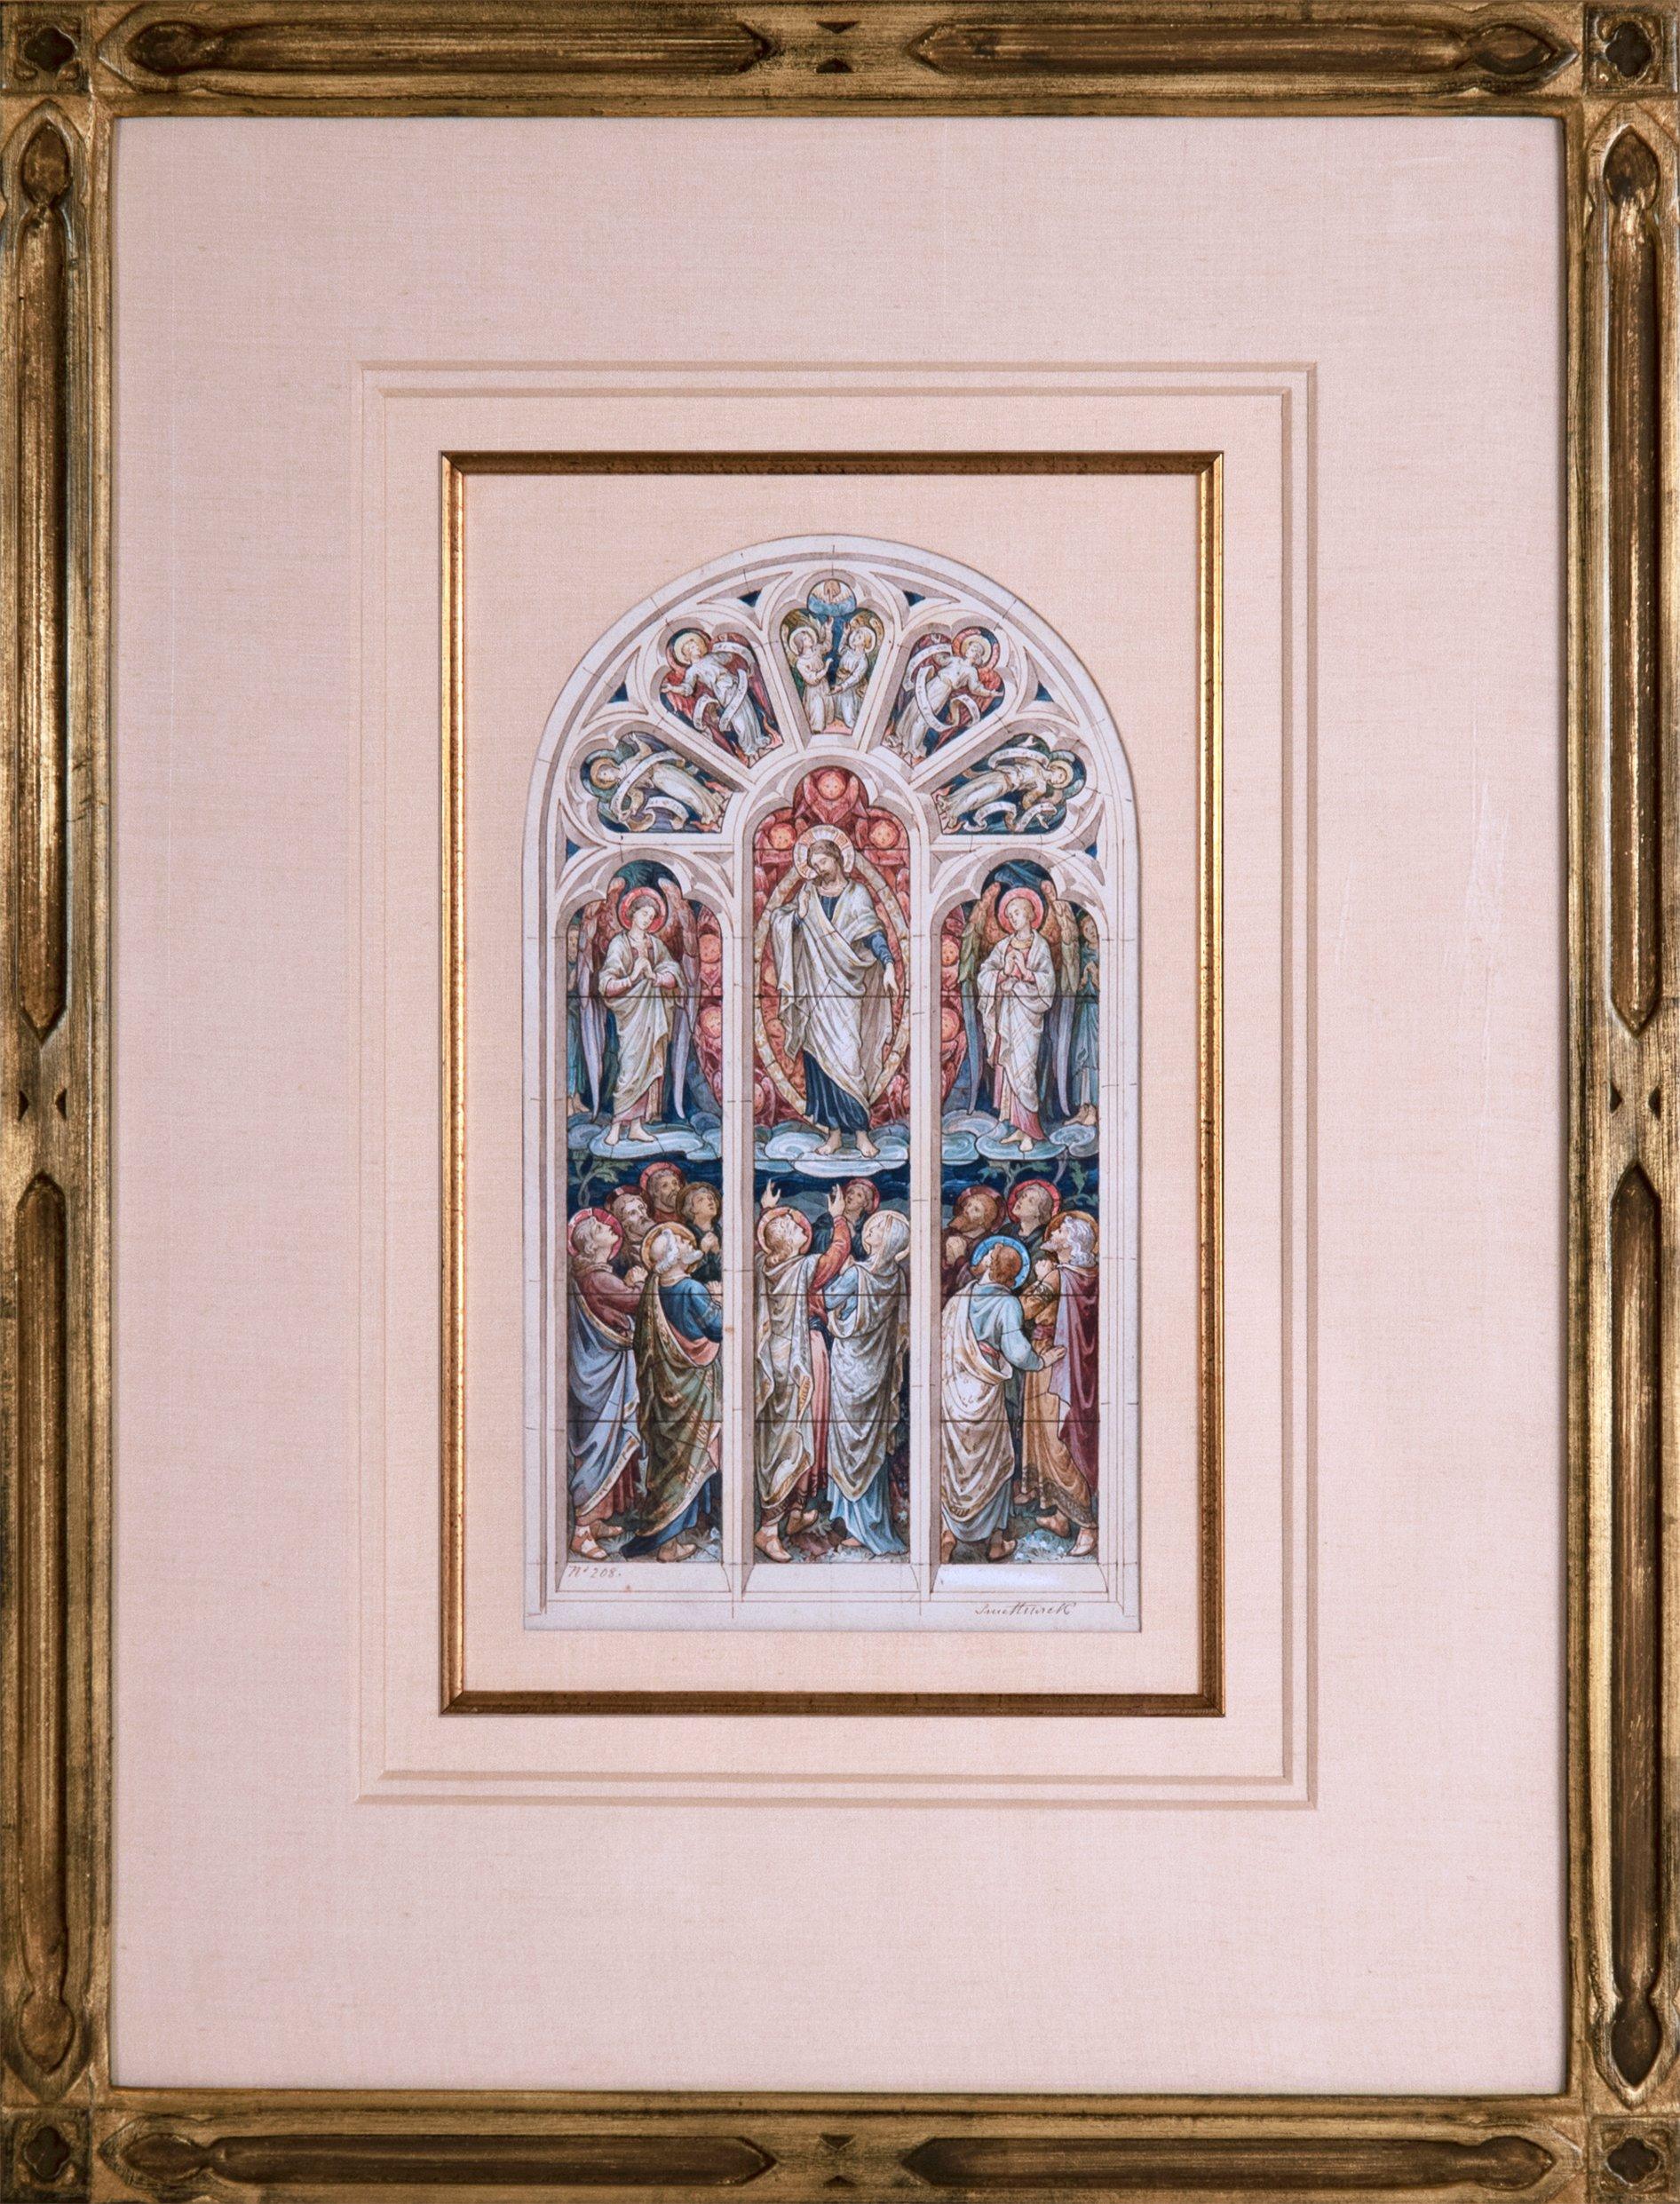 An original watercolor created by the artist Thomas William Camm (British, 1839-1912) for a Church commission. Camm is considered one of Great Britain's most talented designers of stained glass. Before production on a monumental work of stained